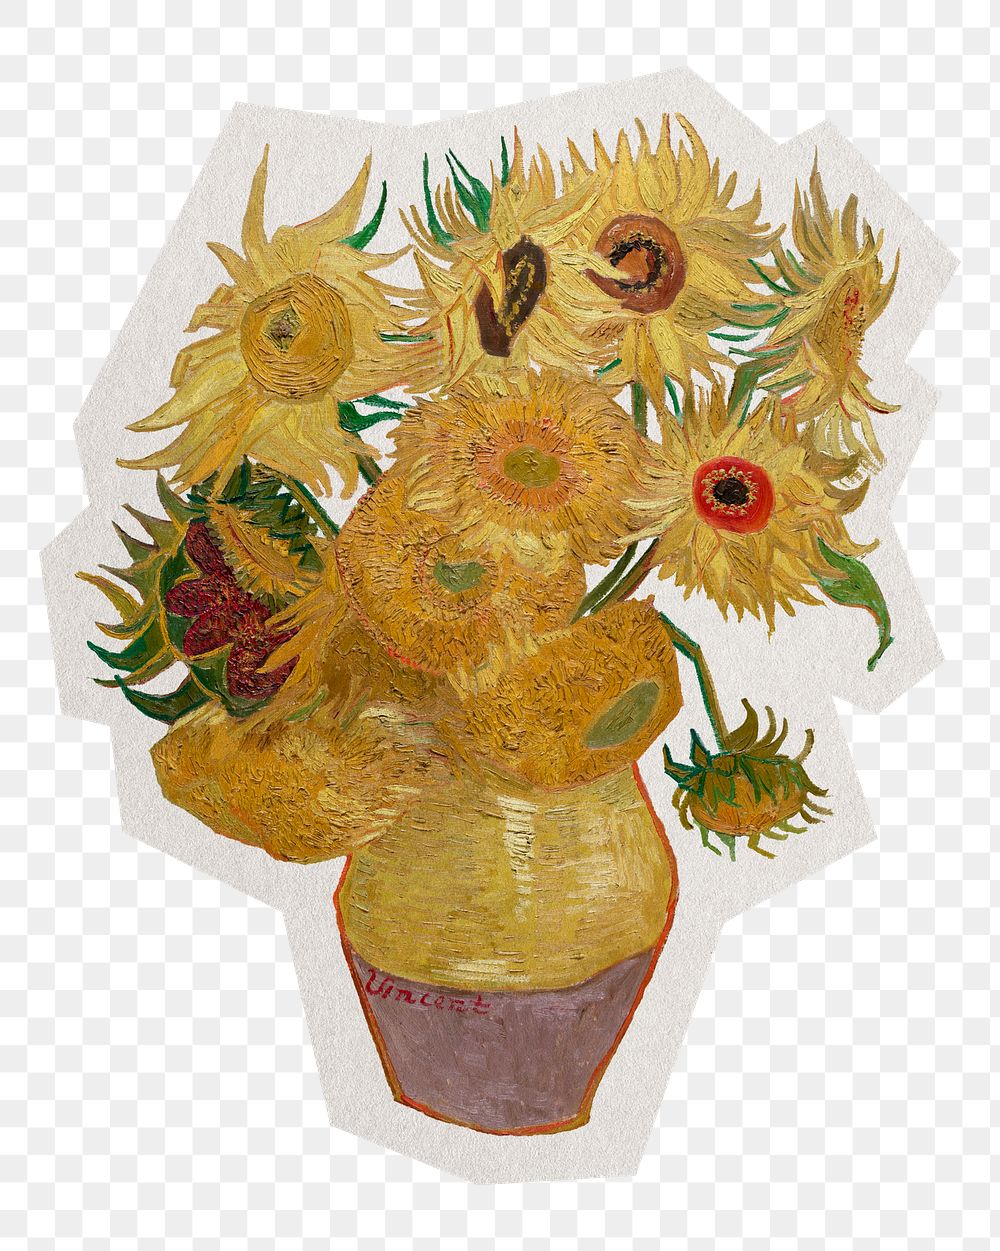 Van Gogh's png Vase with Twelve Sunflowers sticker, transparent background, remixed by rawpixel.